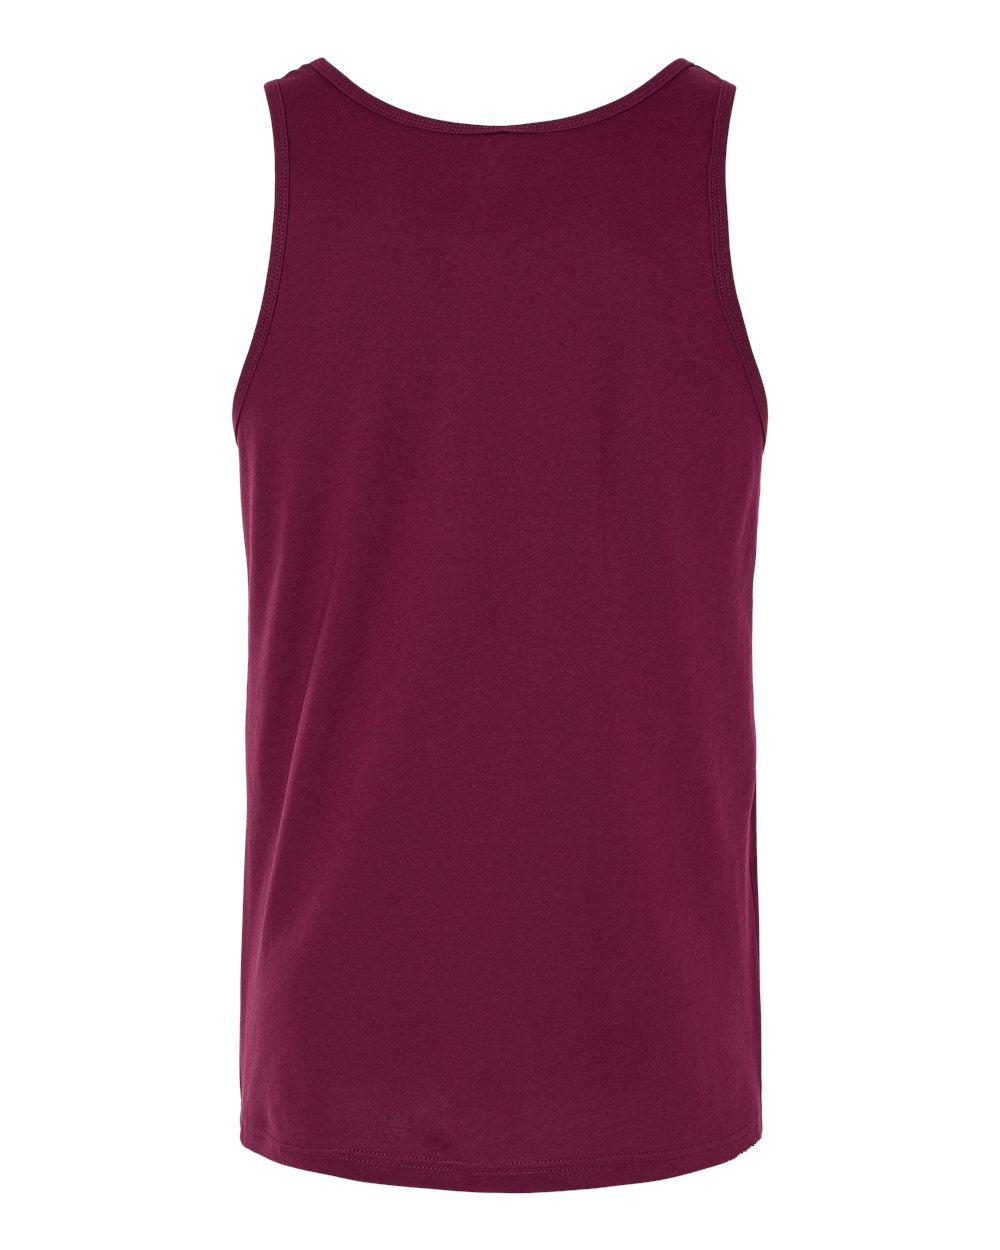 Unisex Jersey Tank- 2 Colors Available